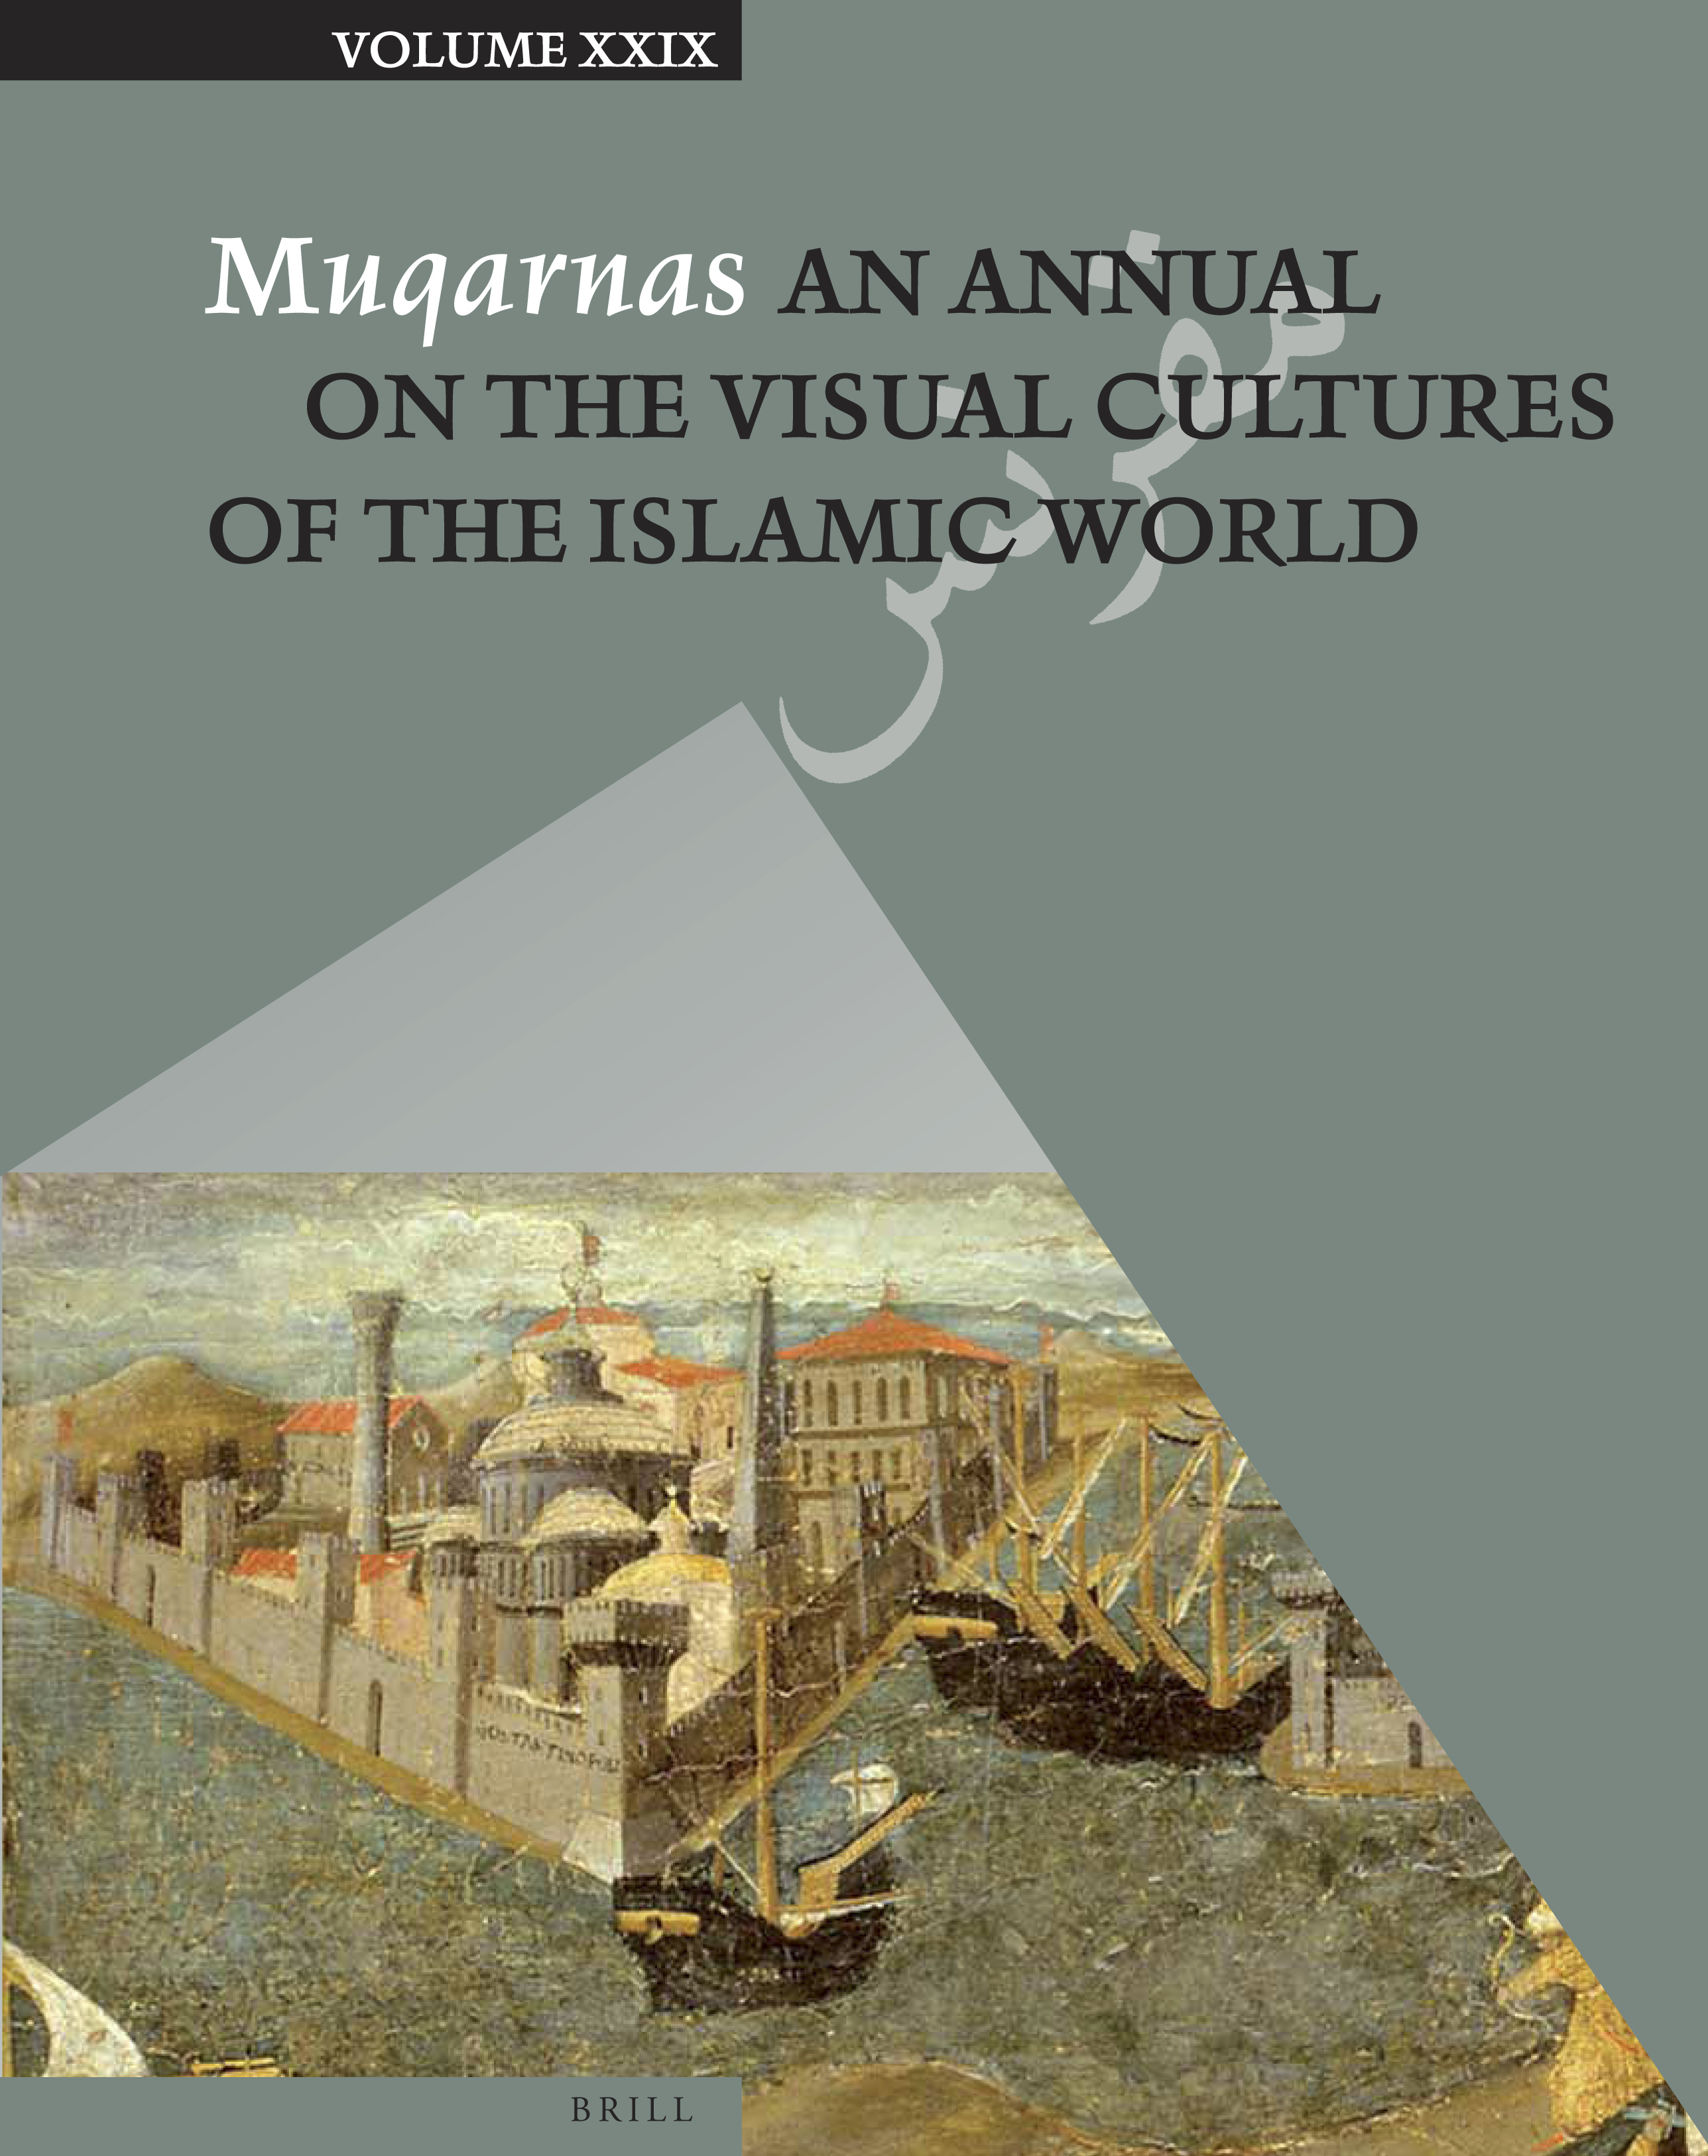 Muqarnas Volume XXIX: An Annual on the Visual Cultures of the Islamic World